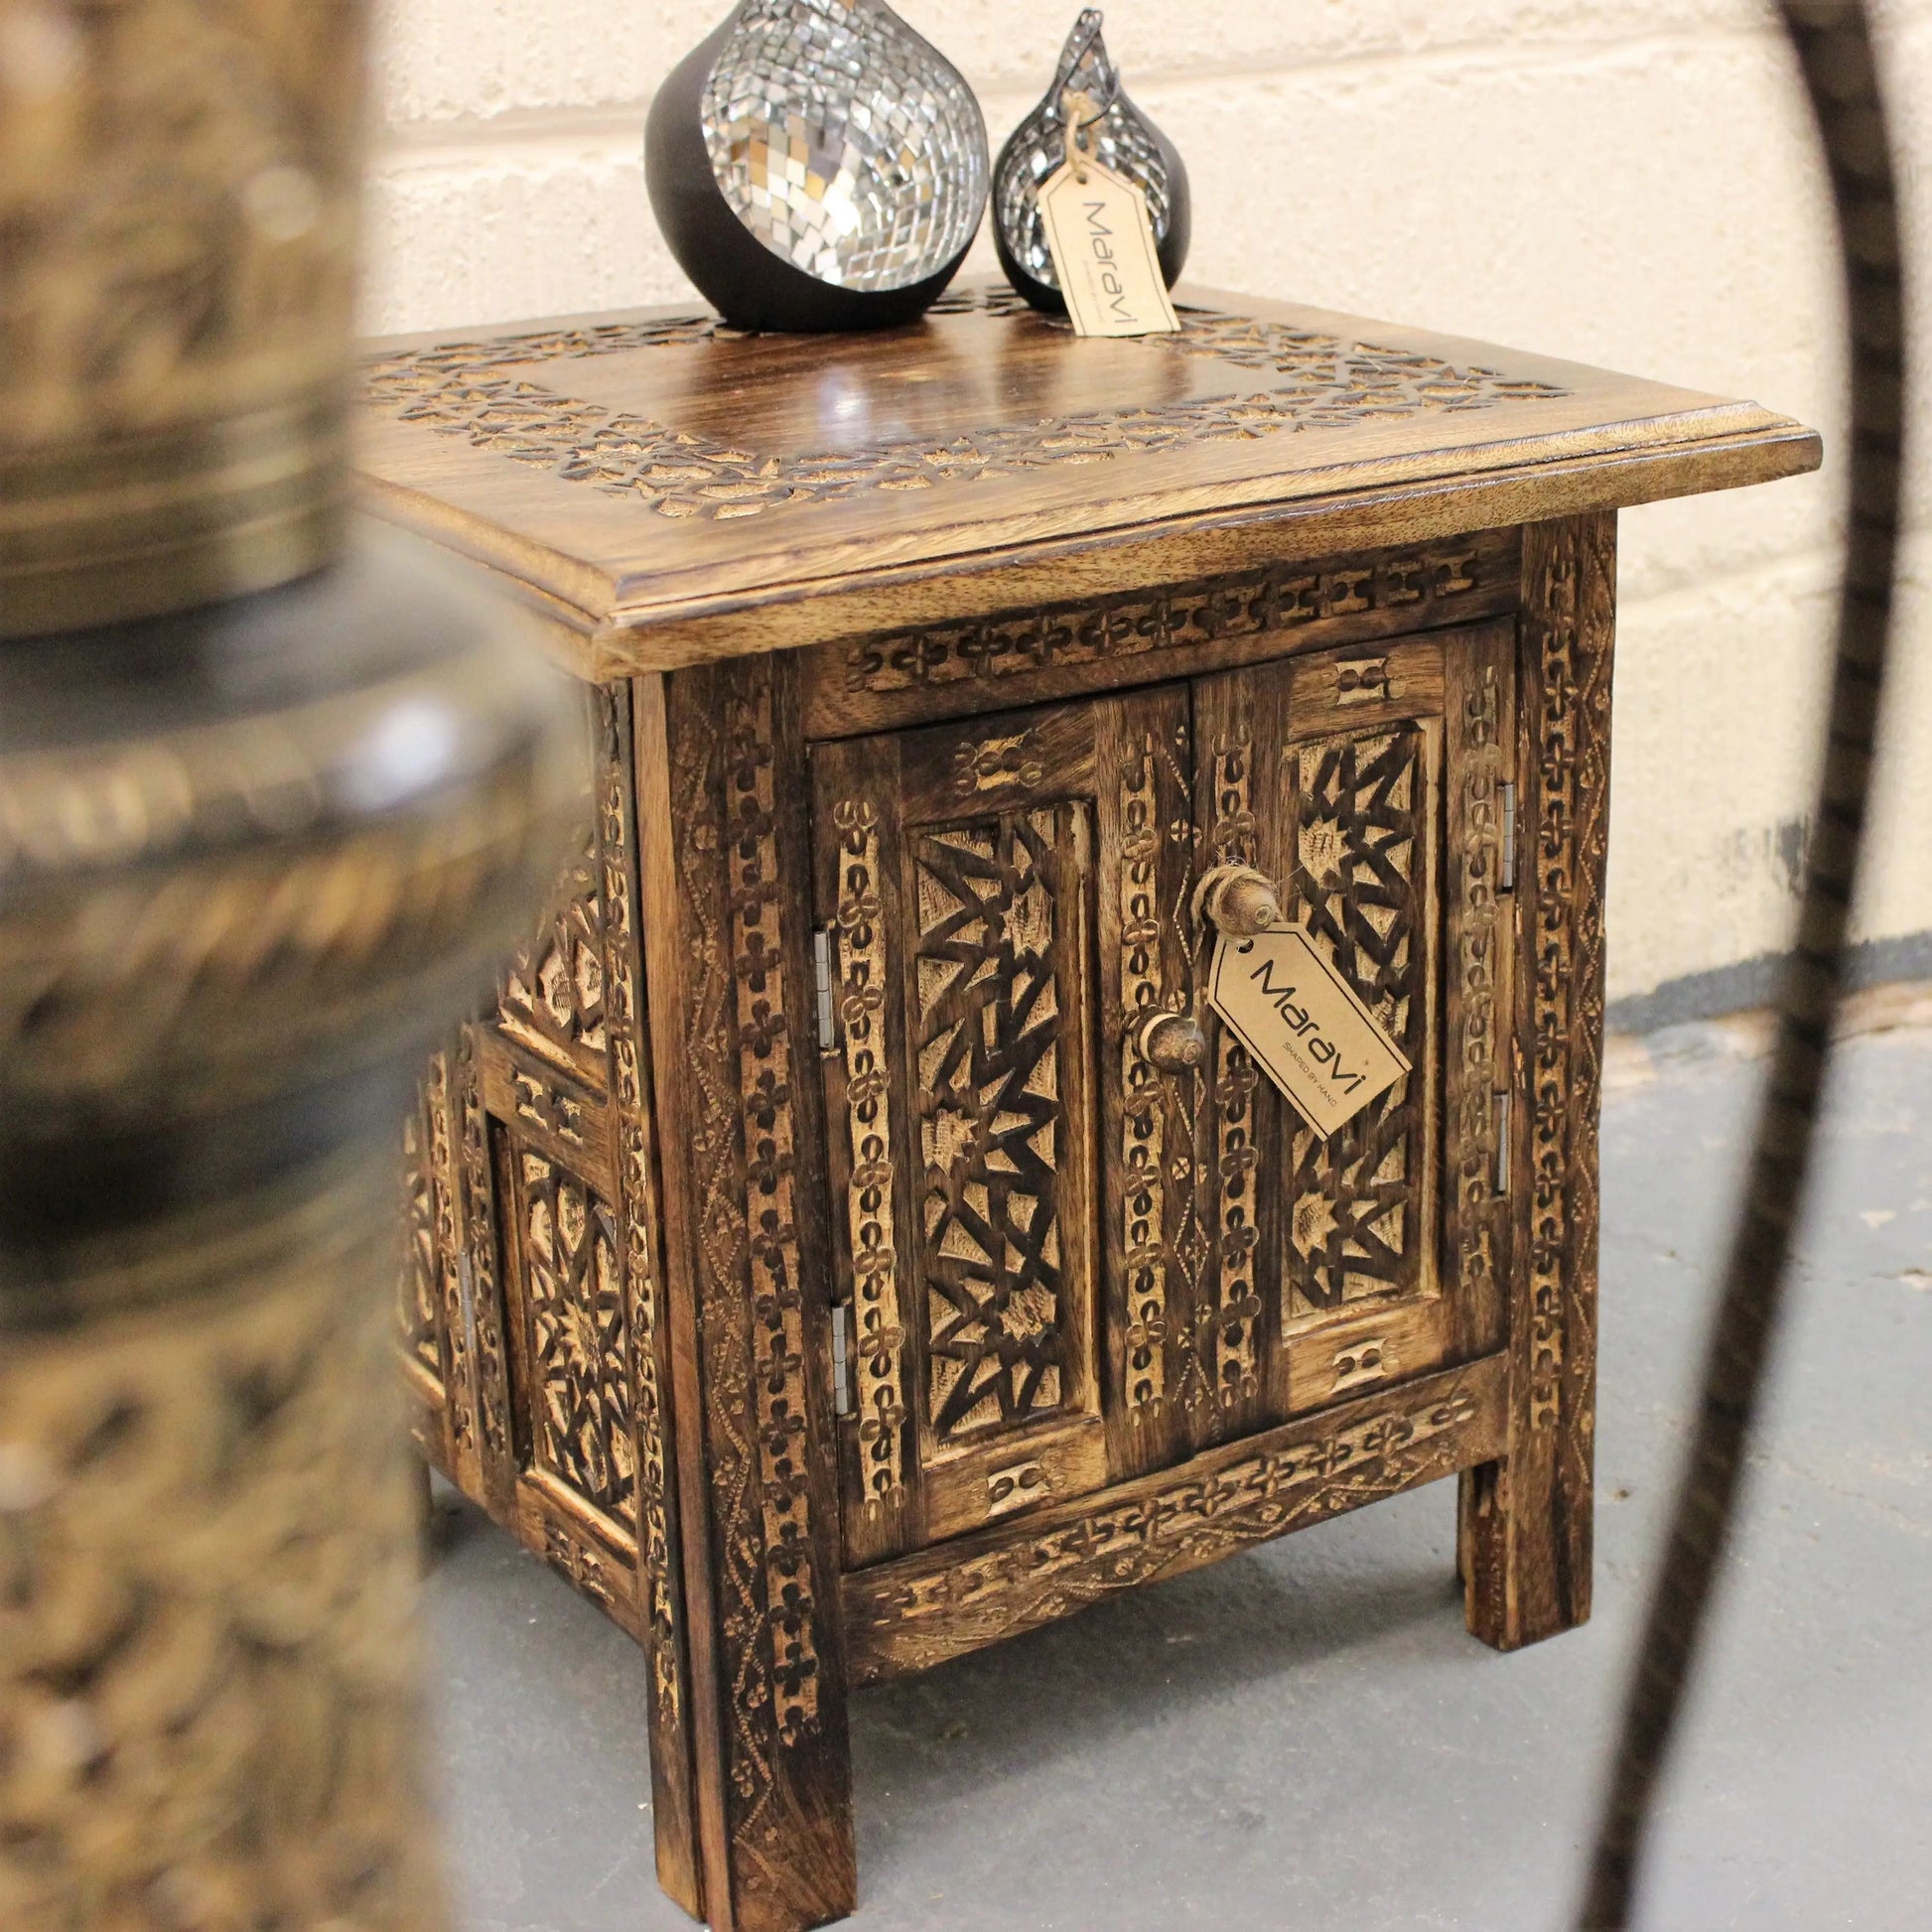 Dal Small Moroccan Style Side Table Scene Image